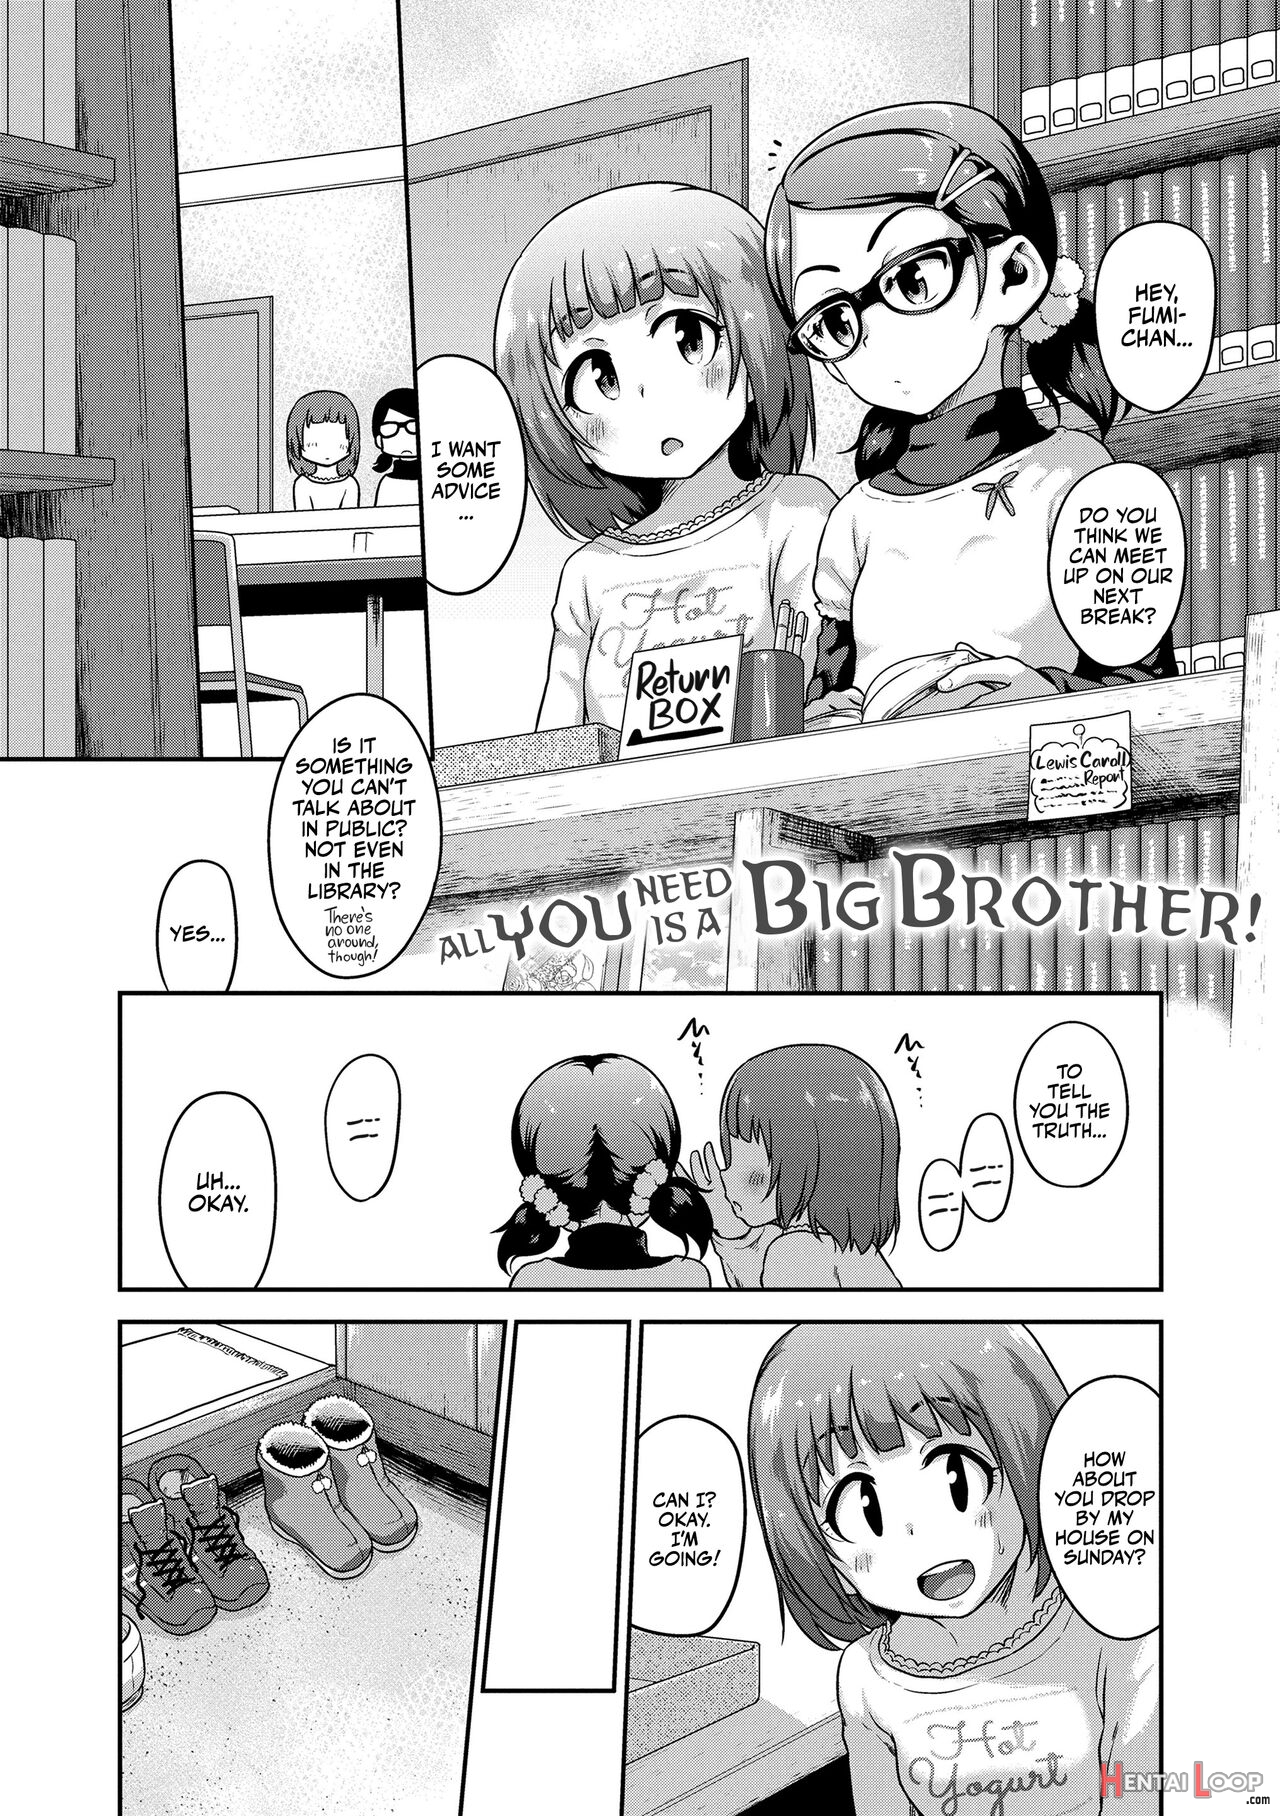 All You Need Is A Big Brother! page 2